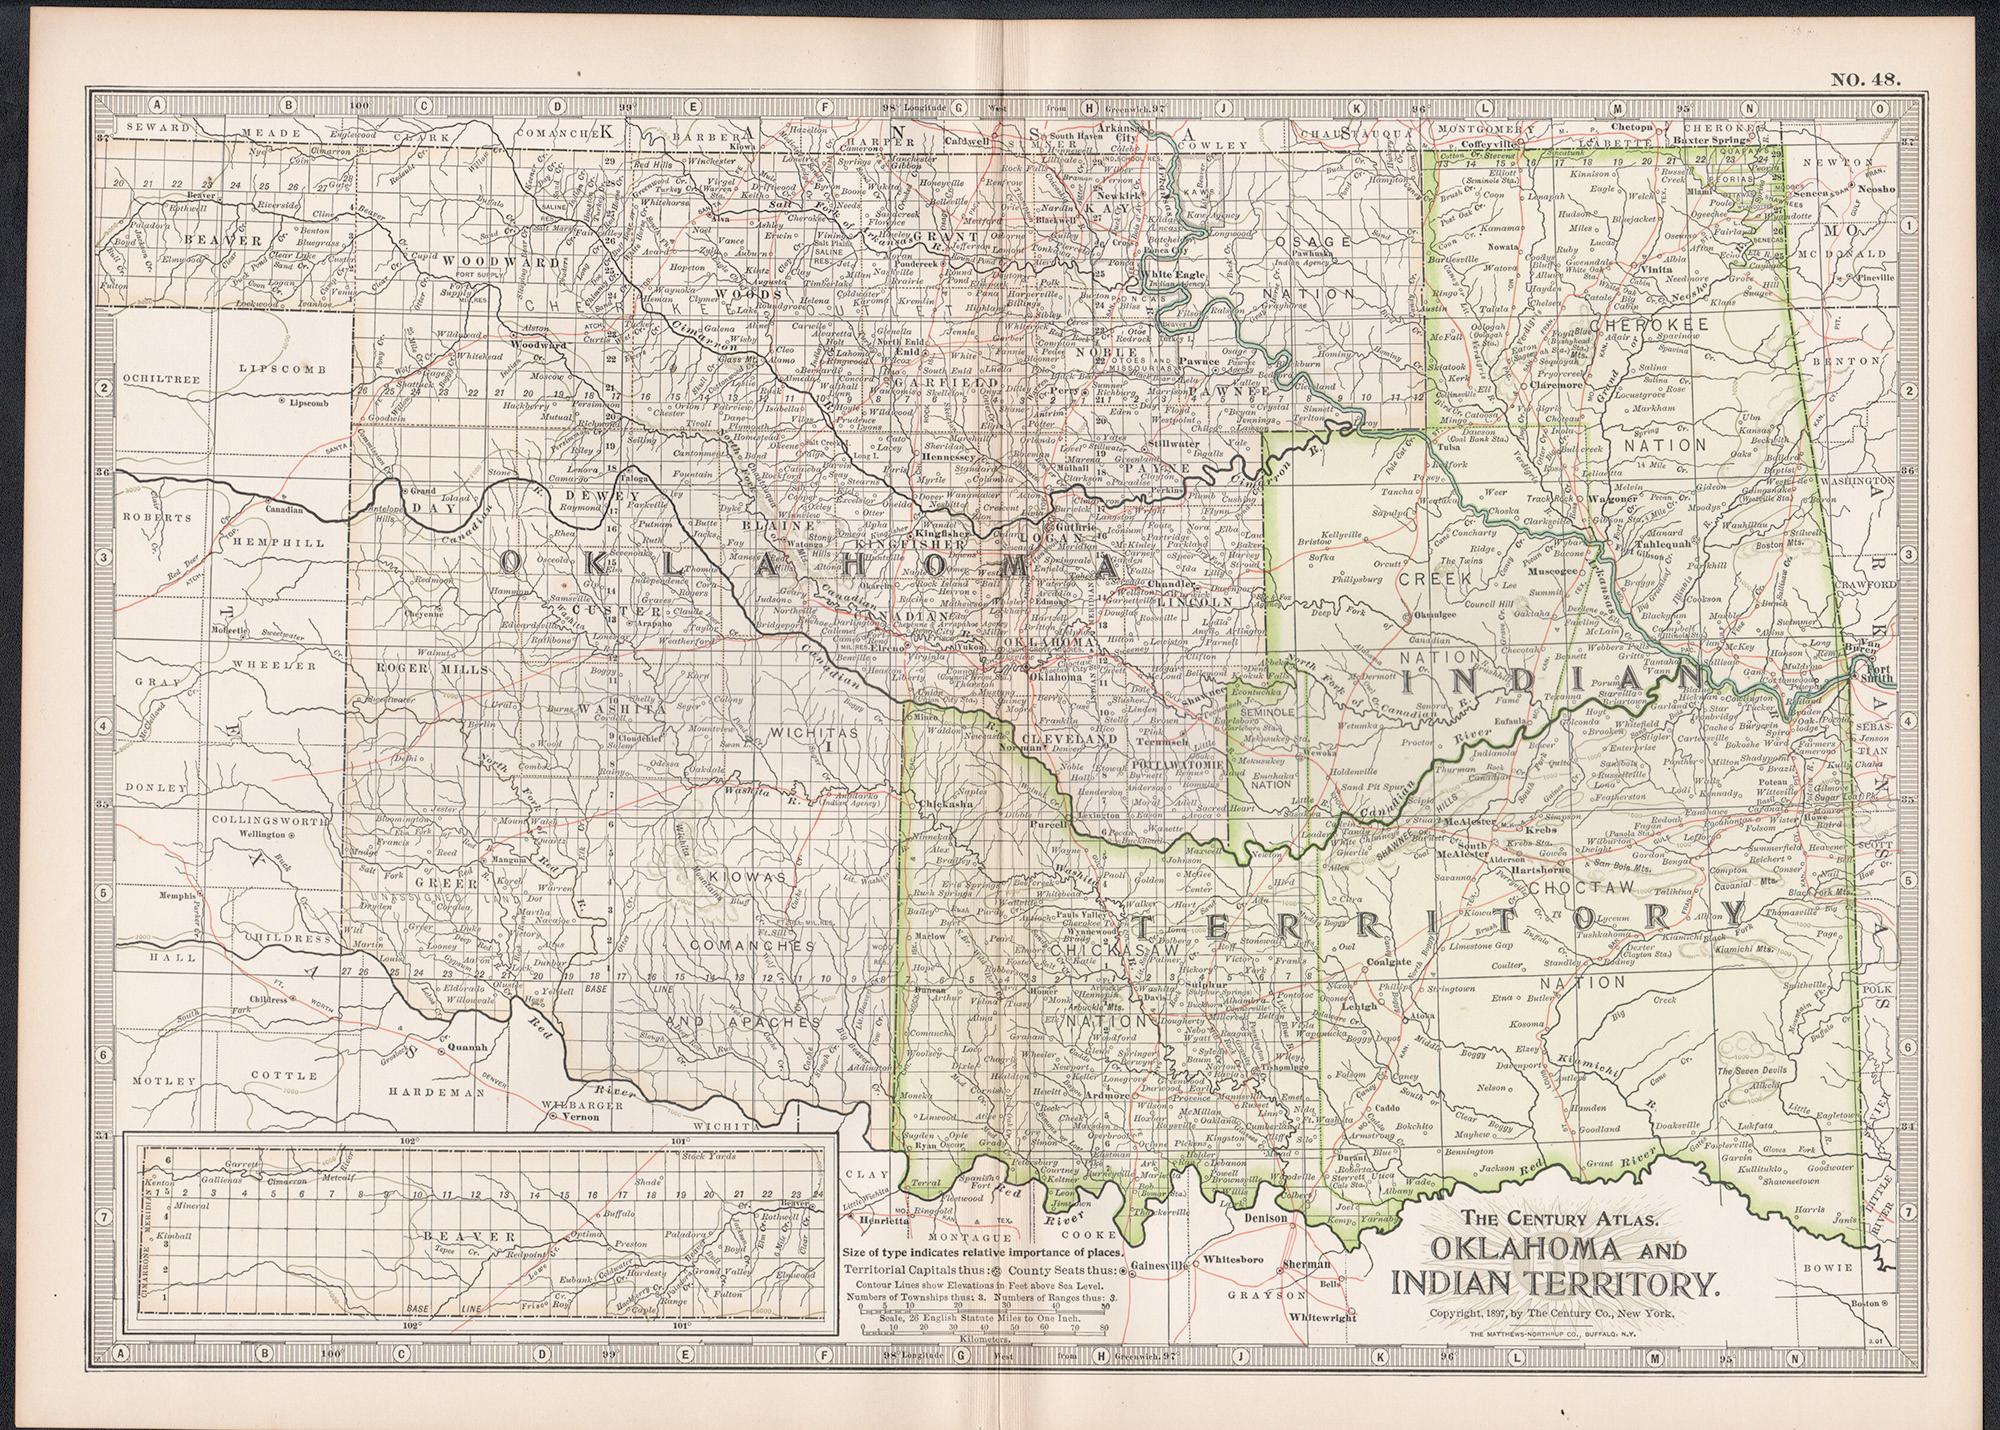 Oklahoma and Indian Territory. USA. Century Atlas state antique vintage map - Print by Unknown